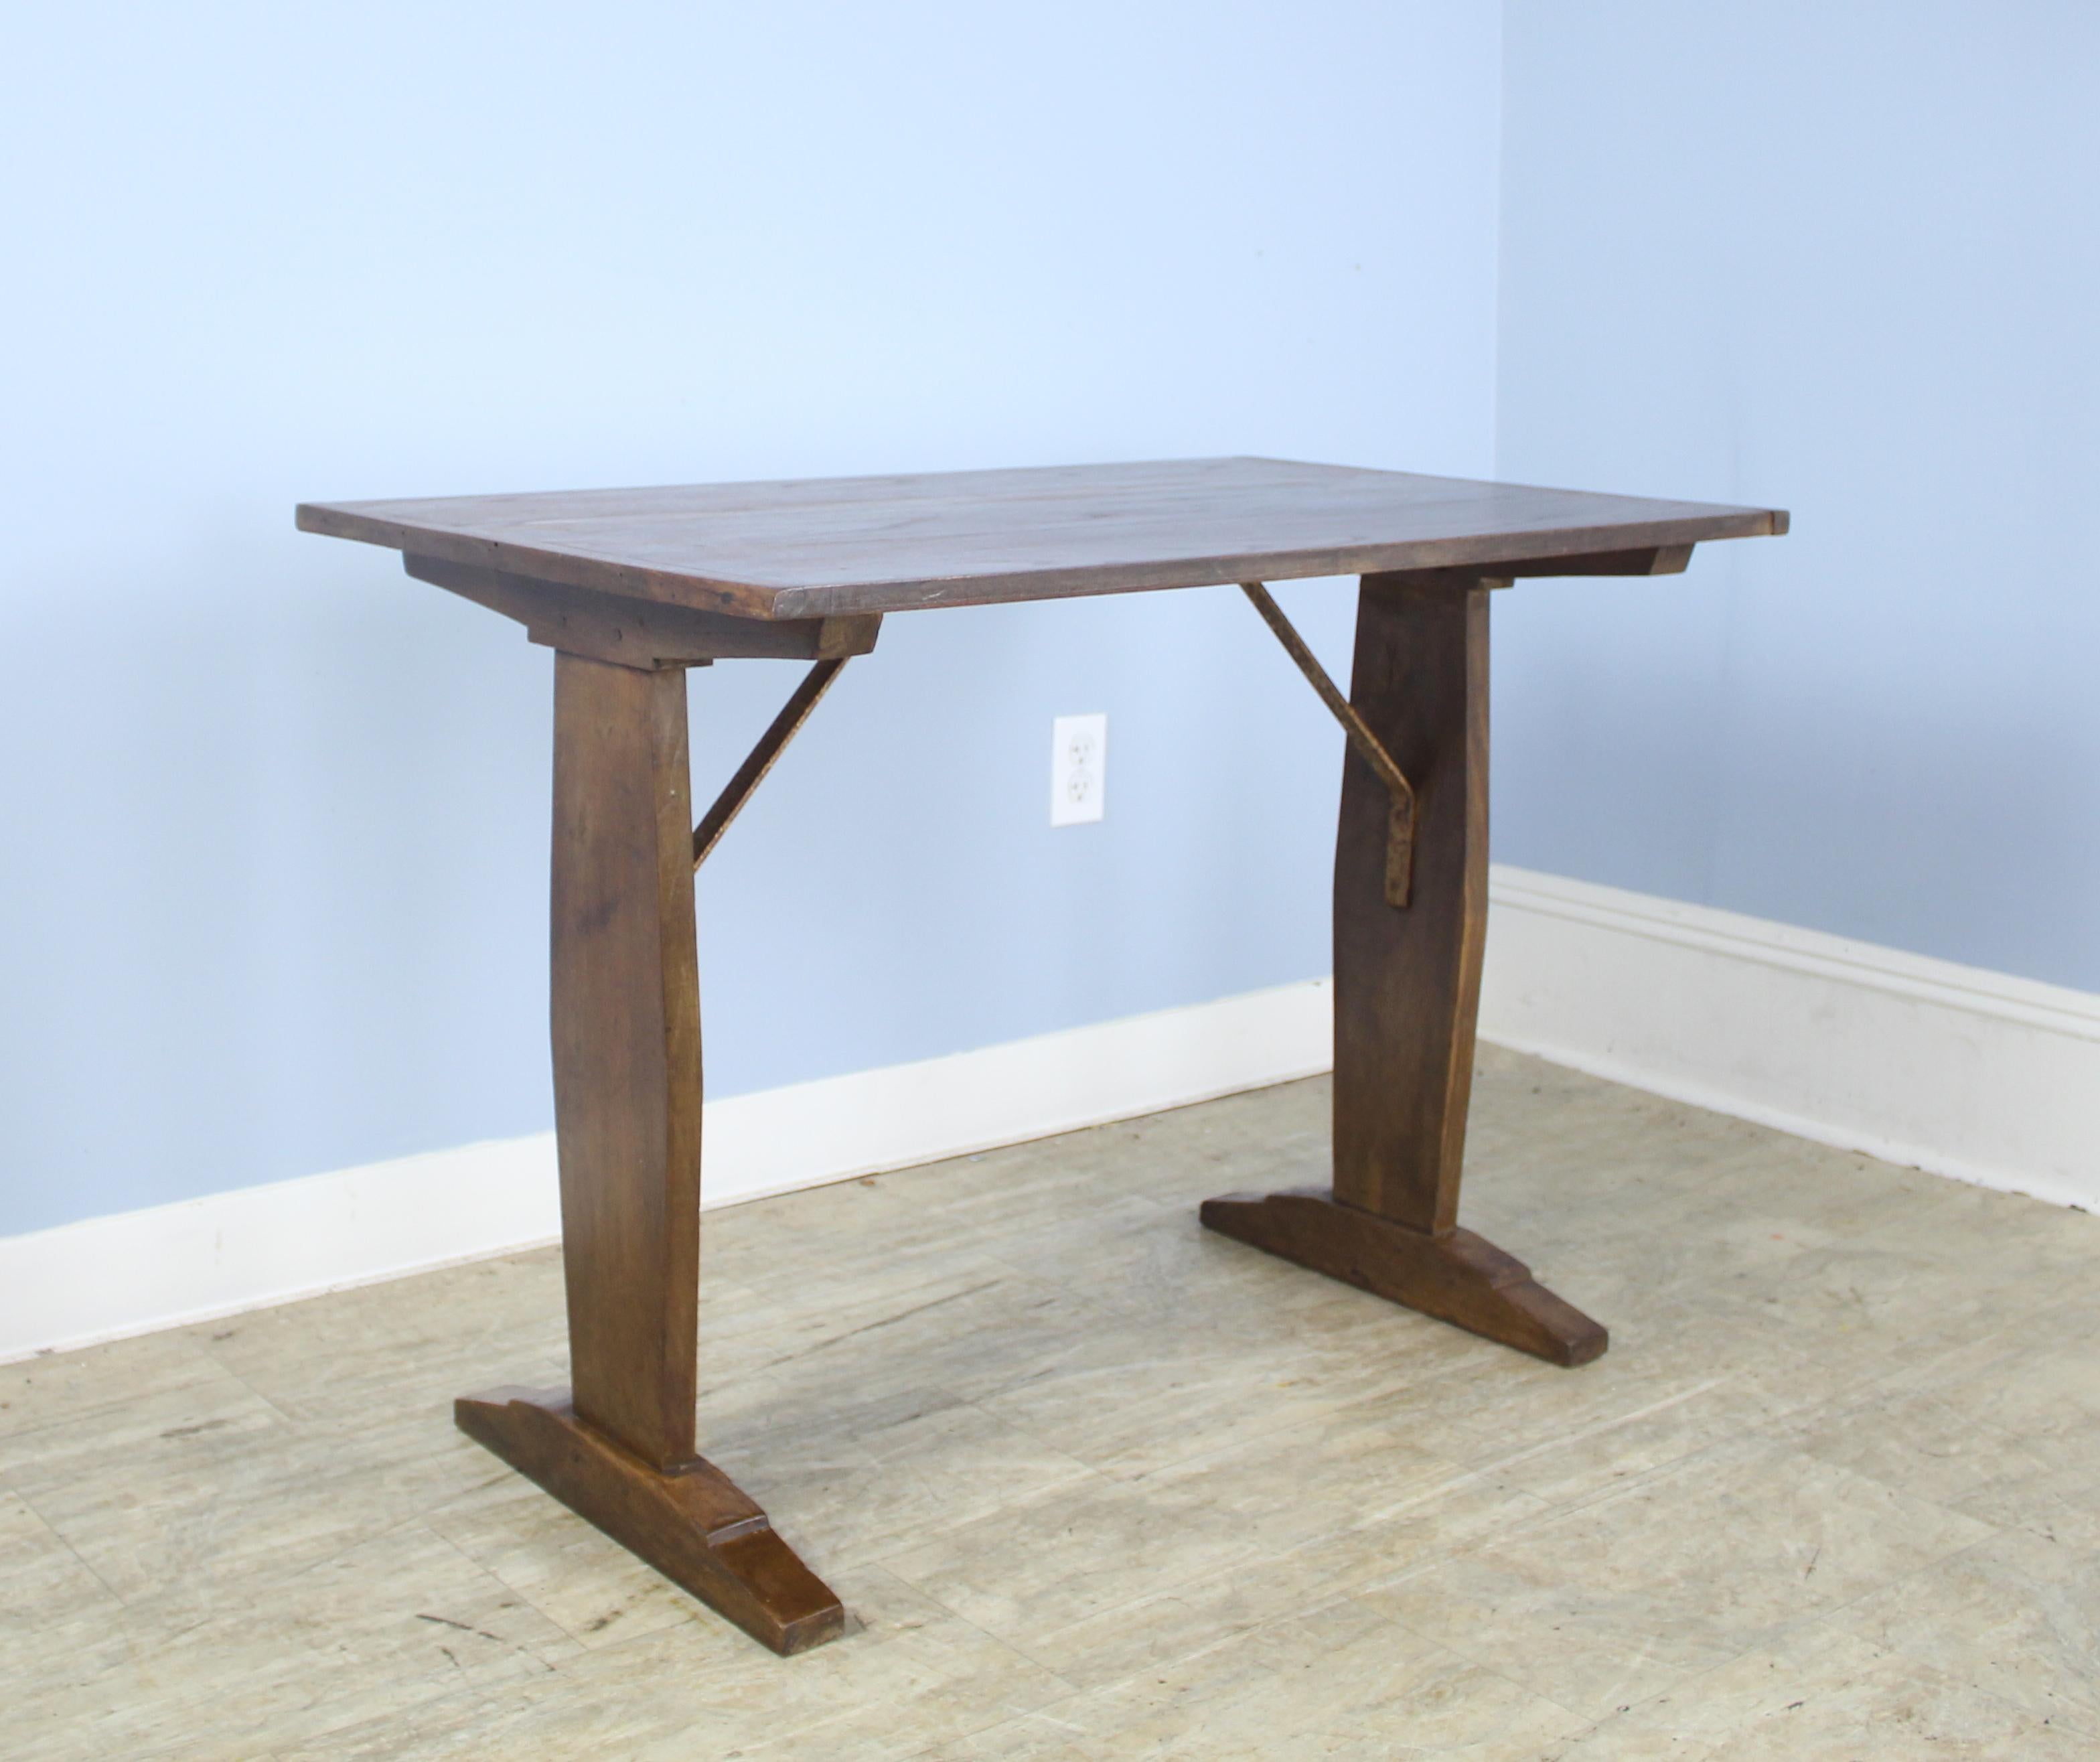 A pretty little breakfast or occasional table, originally from a French eatery. Good looking fruitwood color and grain, with interesting distressed iron supports. If you are looking for two, we have an almost identical one, reference #0621-M68A.